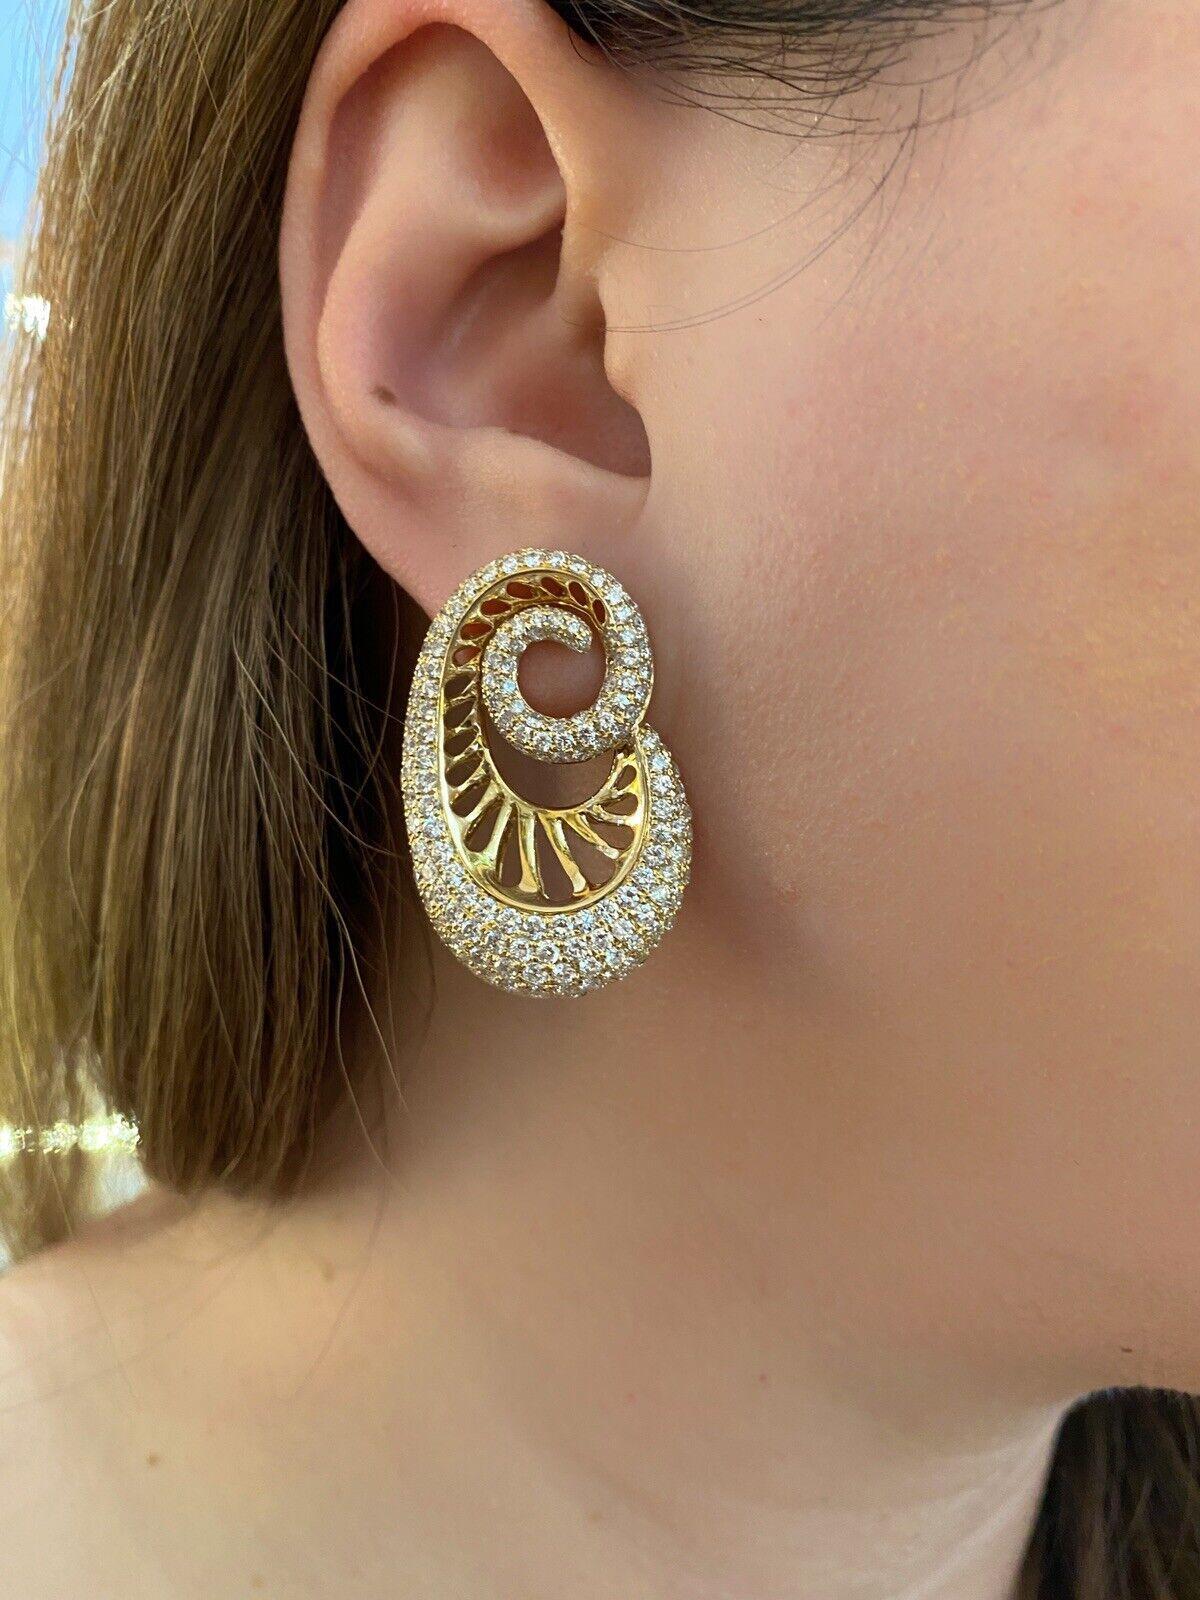 Diamond Pavé Earrings Paisley Design 6.22 Carats Total Weight in 18k Yellow Gold

Diamond Paisley Earrings feature 6.22 carats of Round Brilliant Diamonds Pavé set in a Paisley Design set in 18k Yellow Gold. Earrings are secured by post with